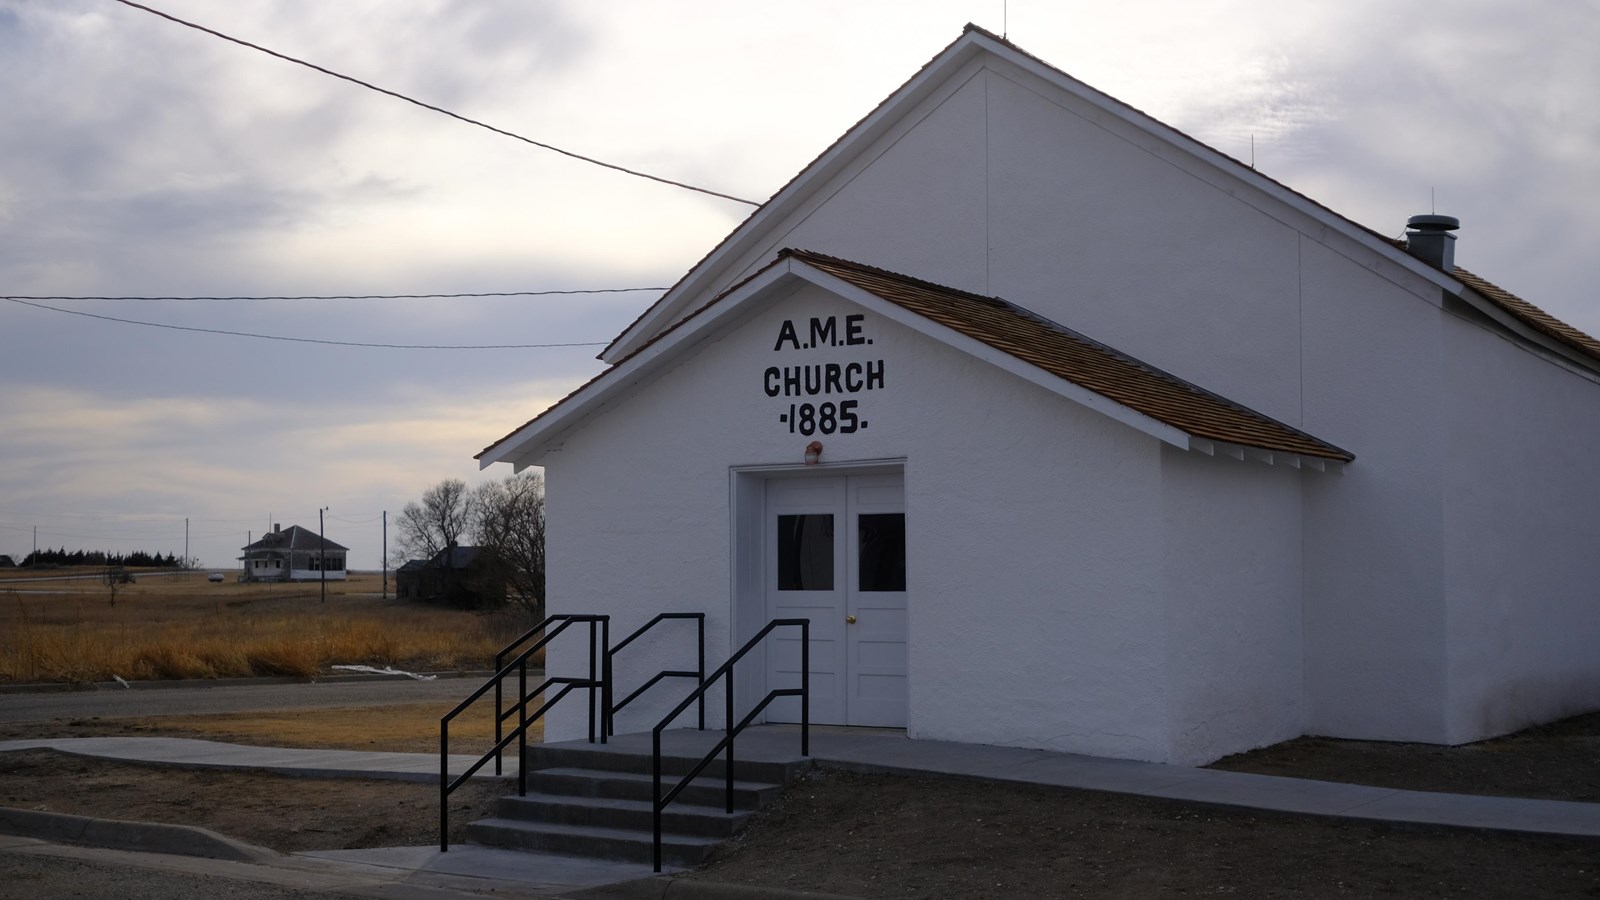 A white stucco church with A.M.E. Church 1885 written above the front door